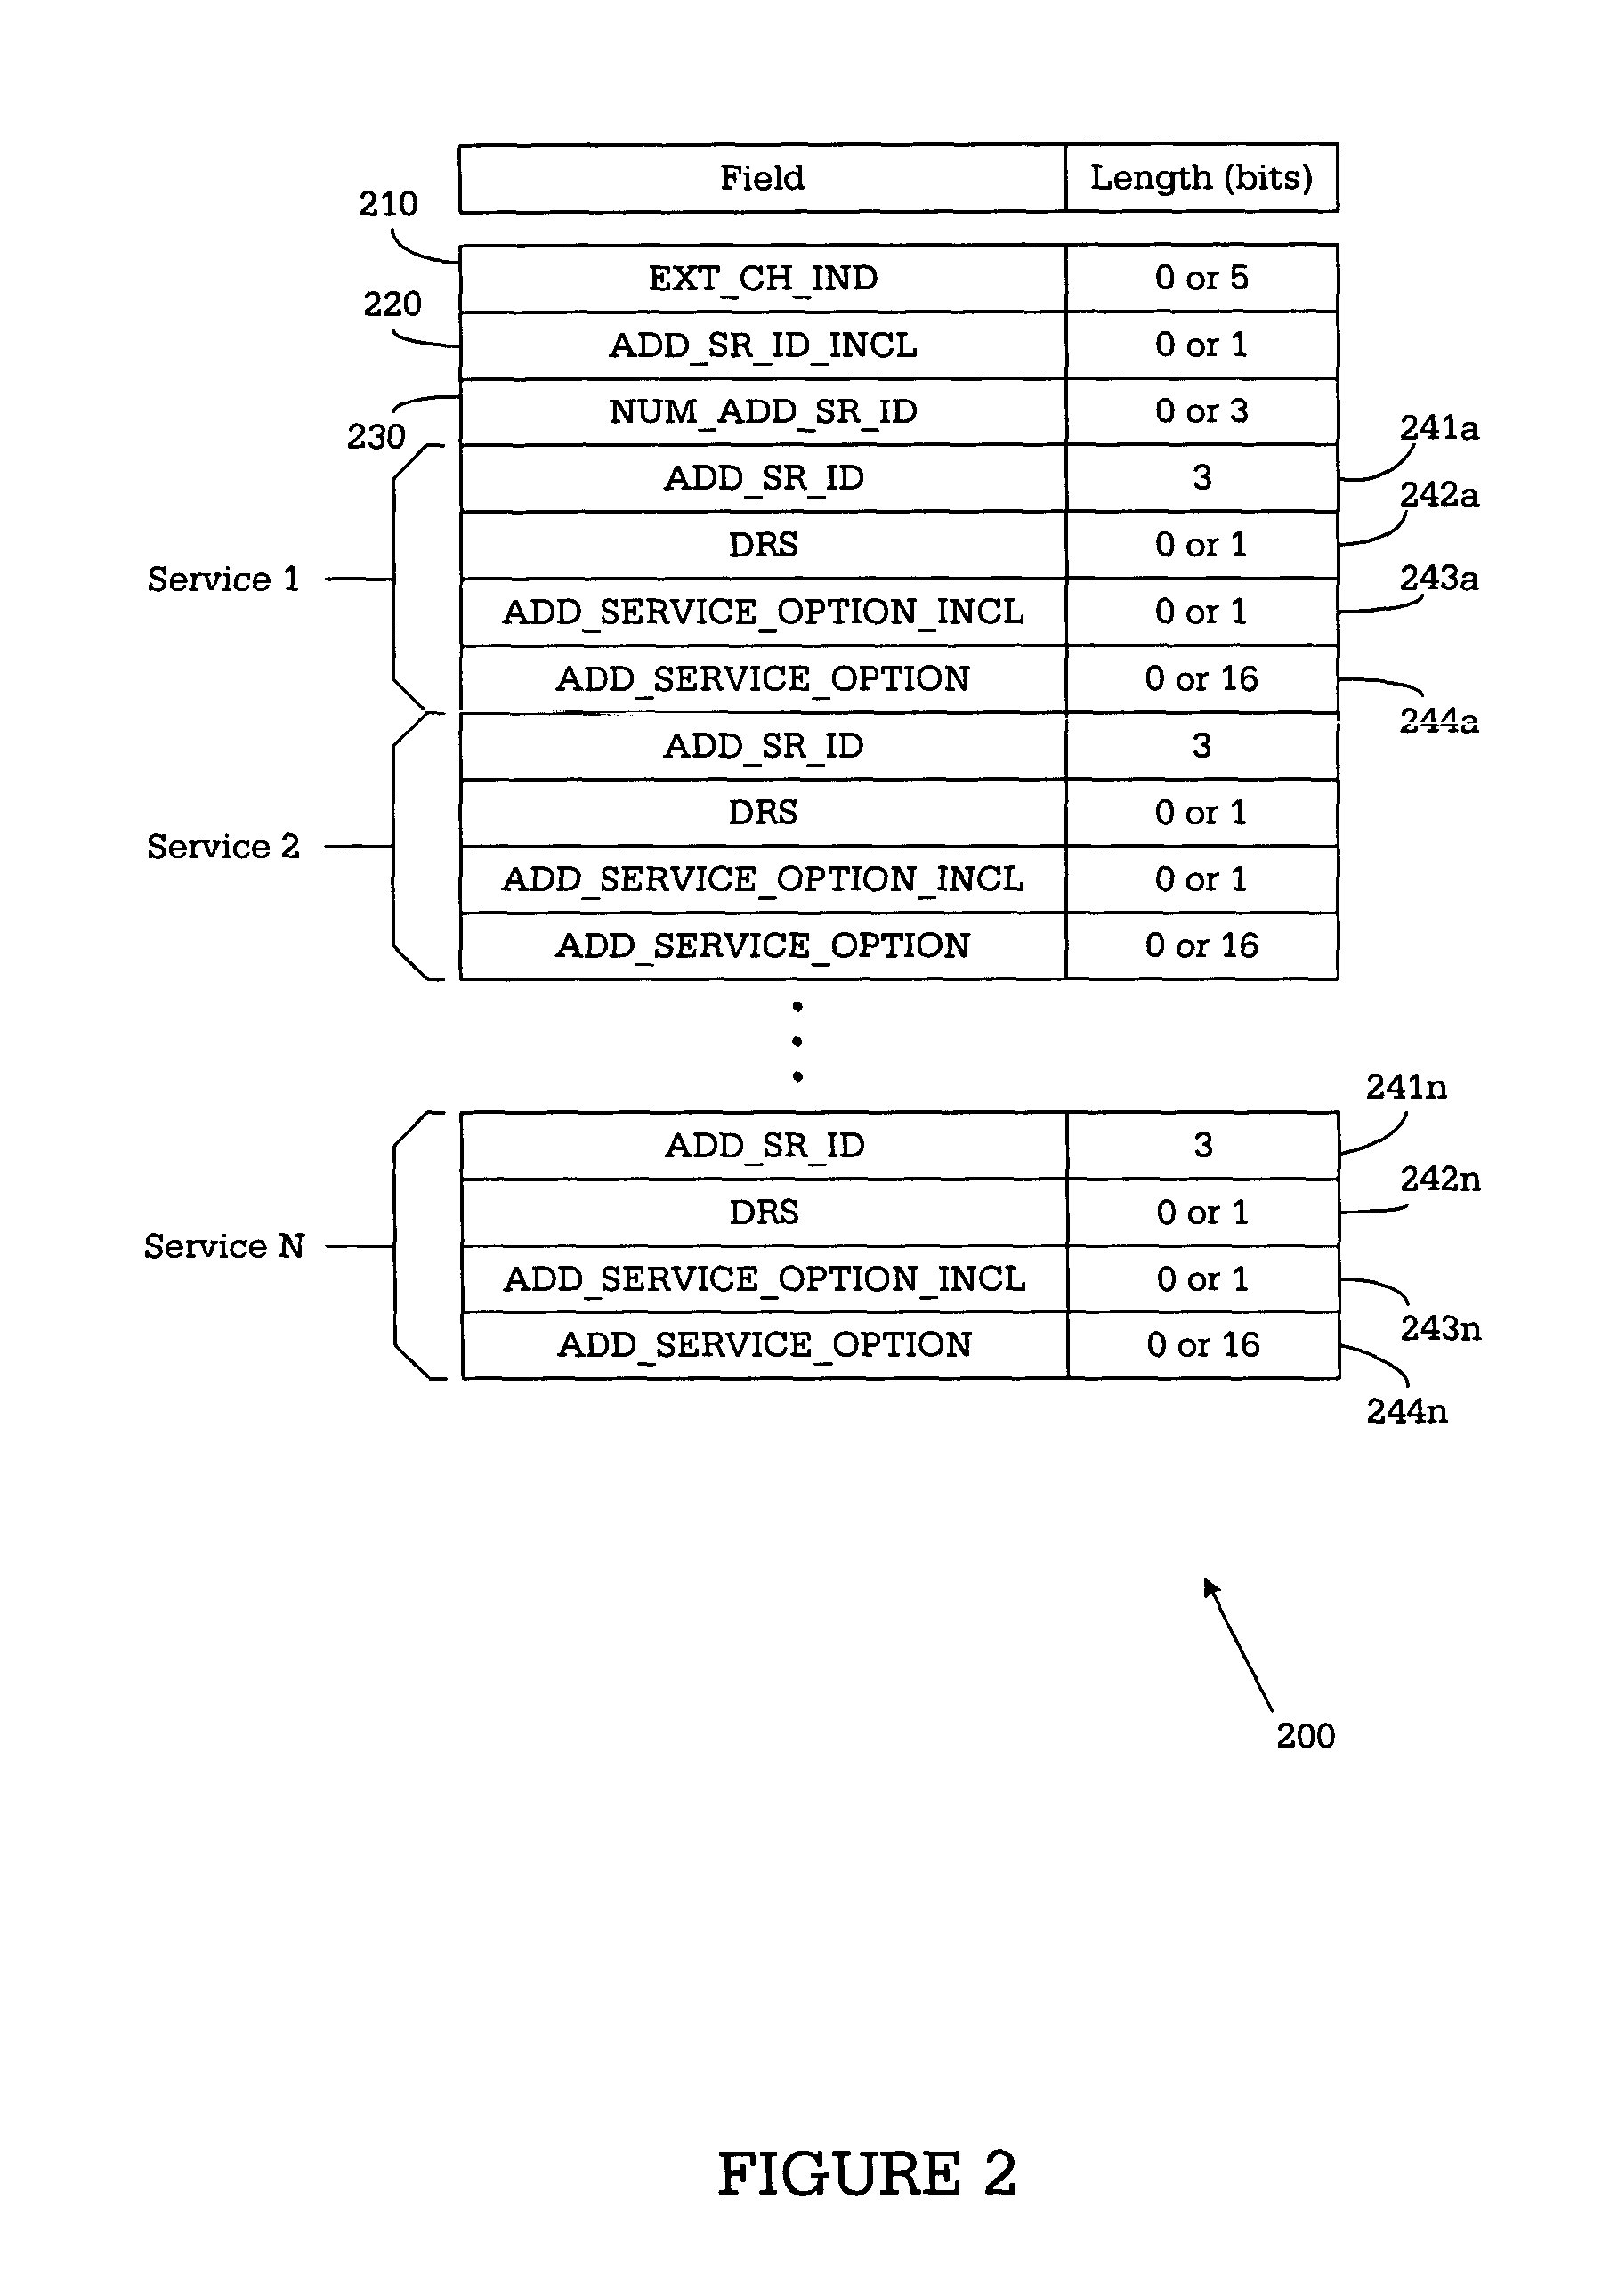 Apparatus and method for reactivating multiple packet data sessions in a wireless network